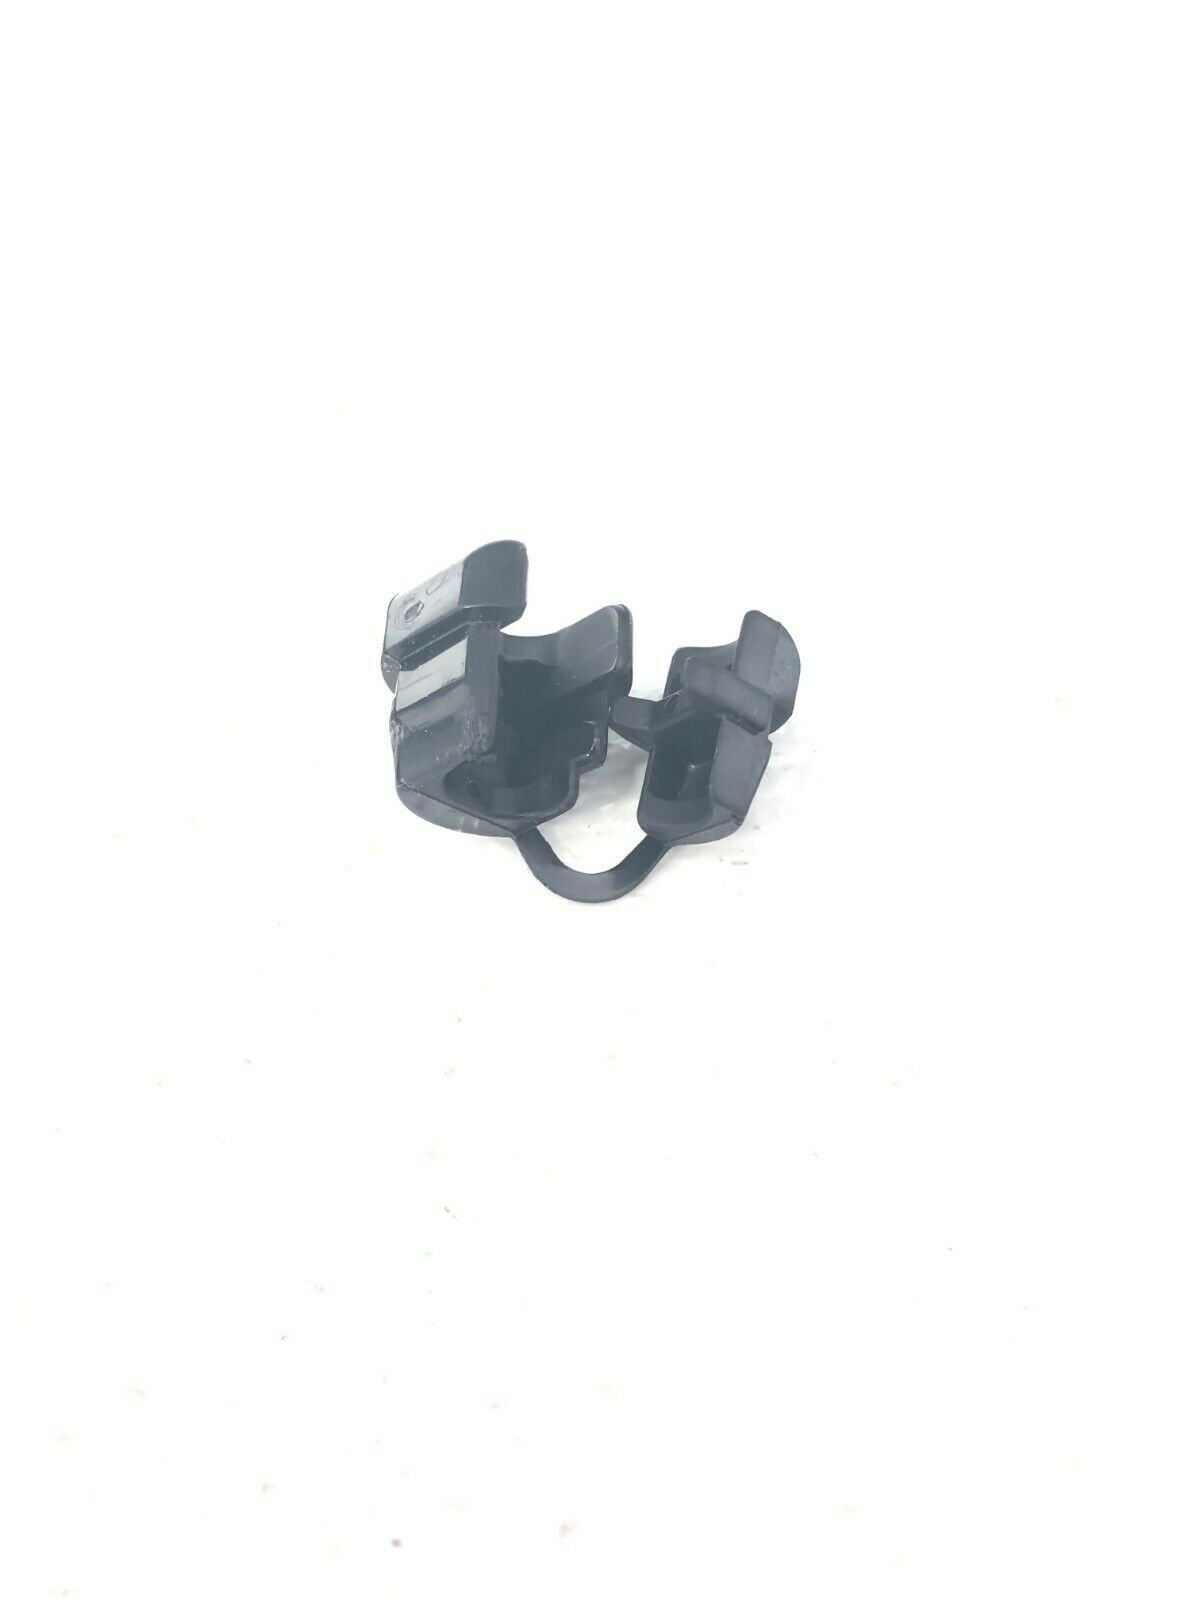 Power Cord Strain Relief (Used)